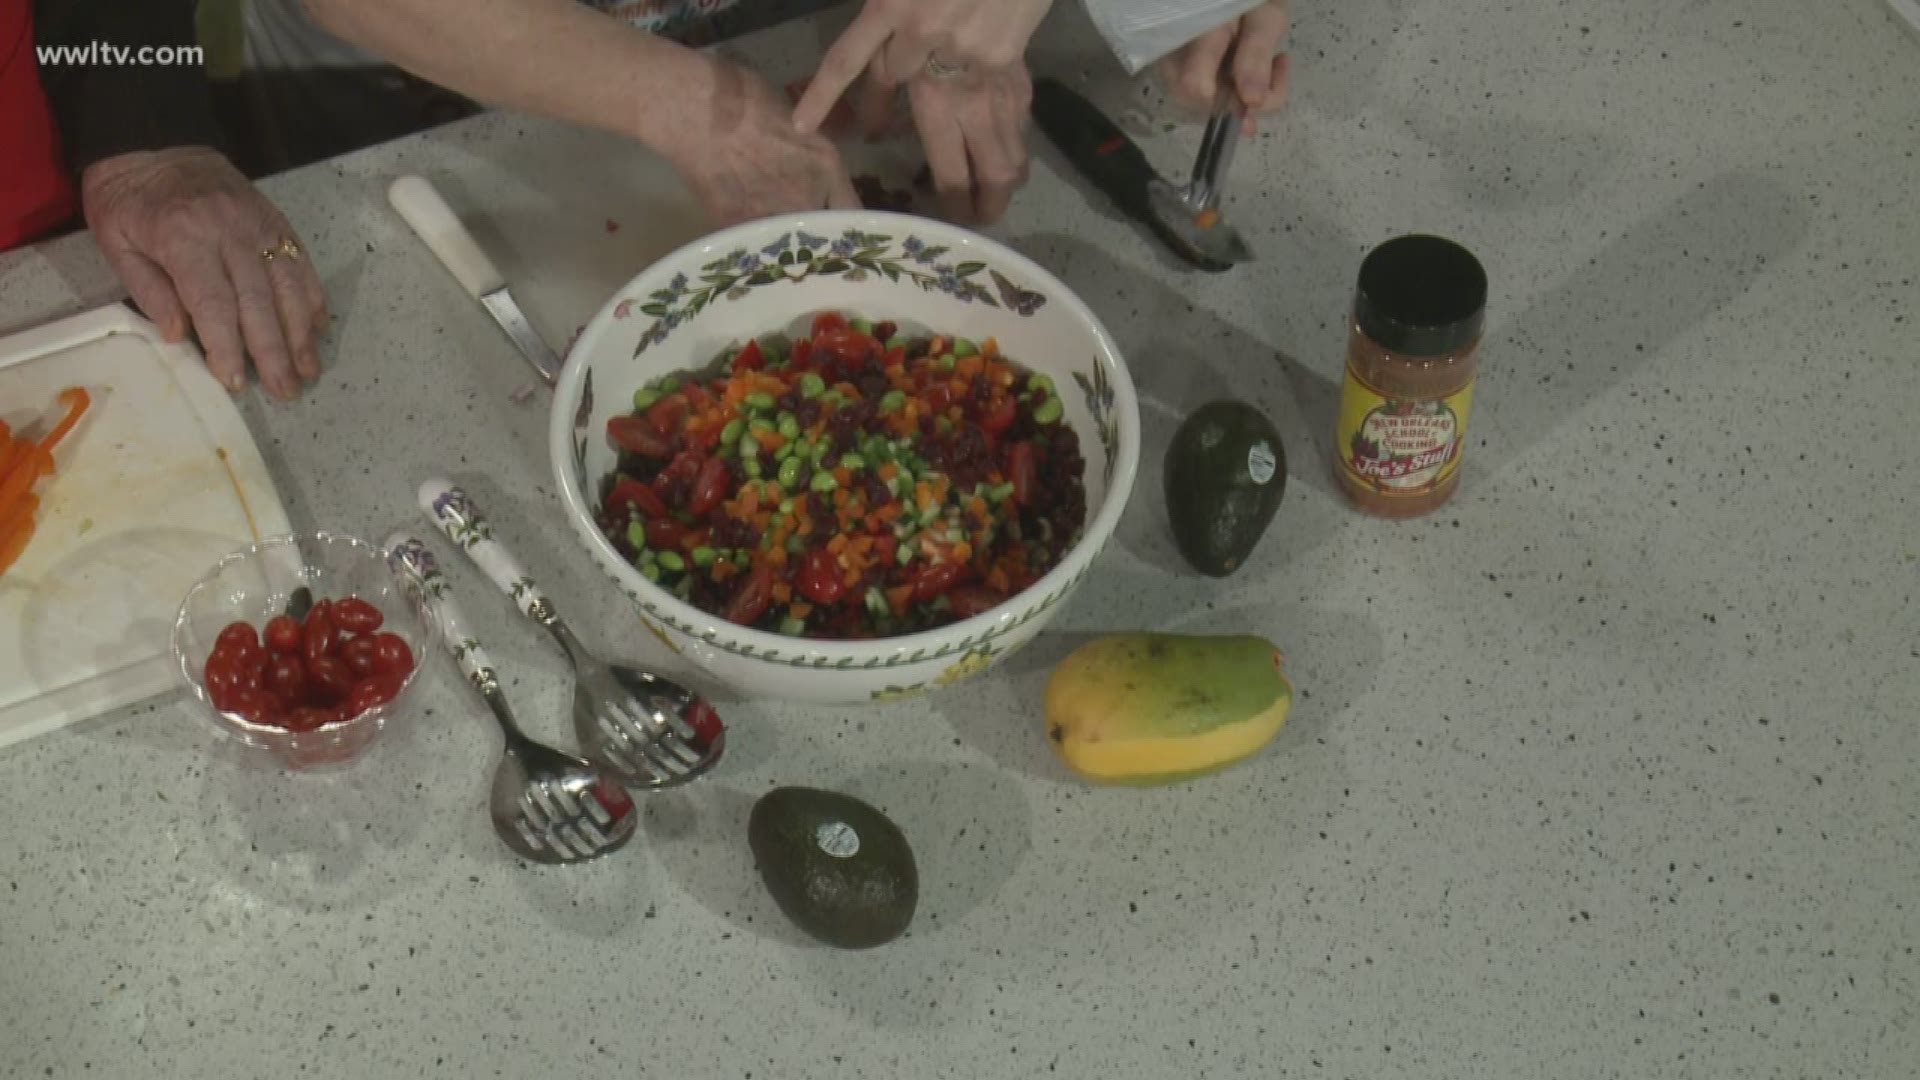 The Nola grandmas are in the kitchen with a refreshing Black Eyed Pea Salad